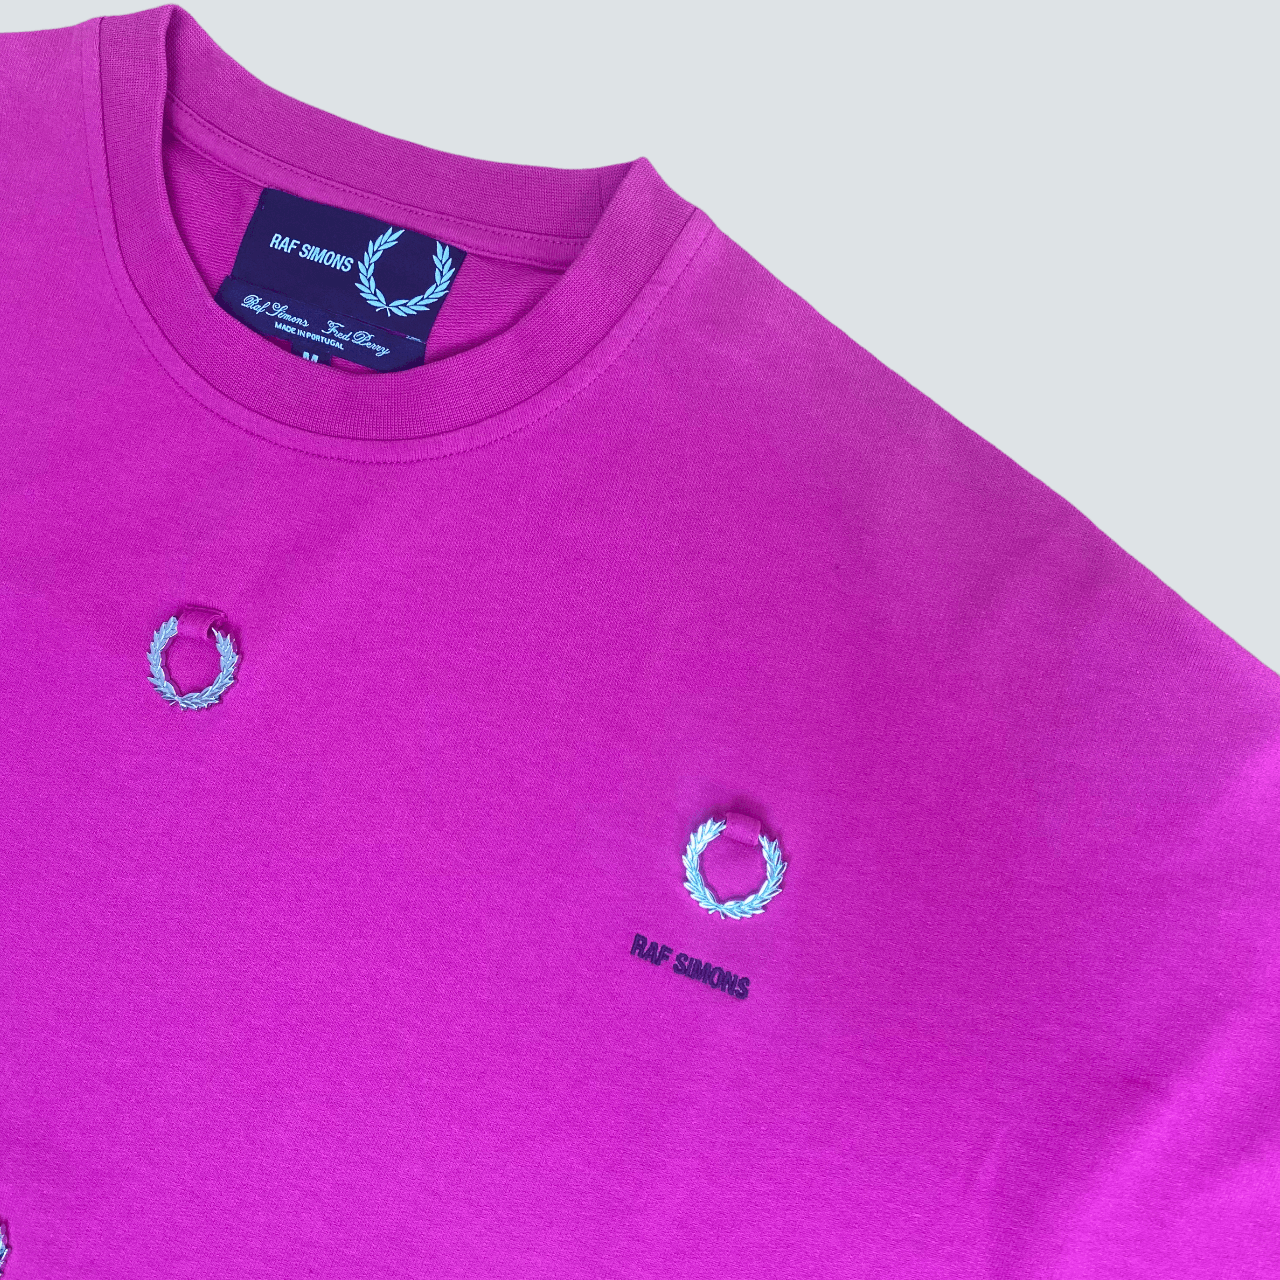 RAF SIMONS 19AW Fred Perry Pink Crewneck Long sleeve T-shirt (M) - Known Source